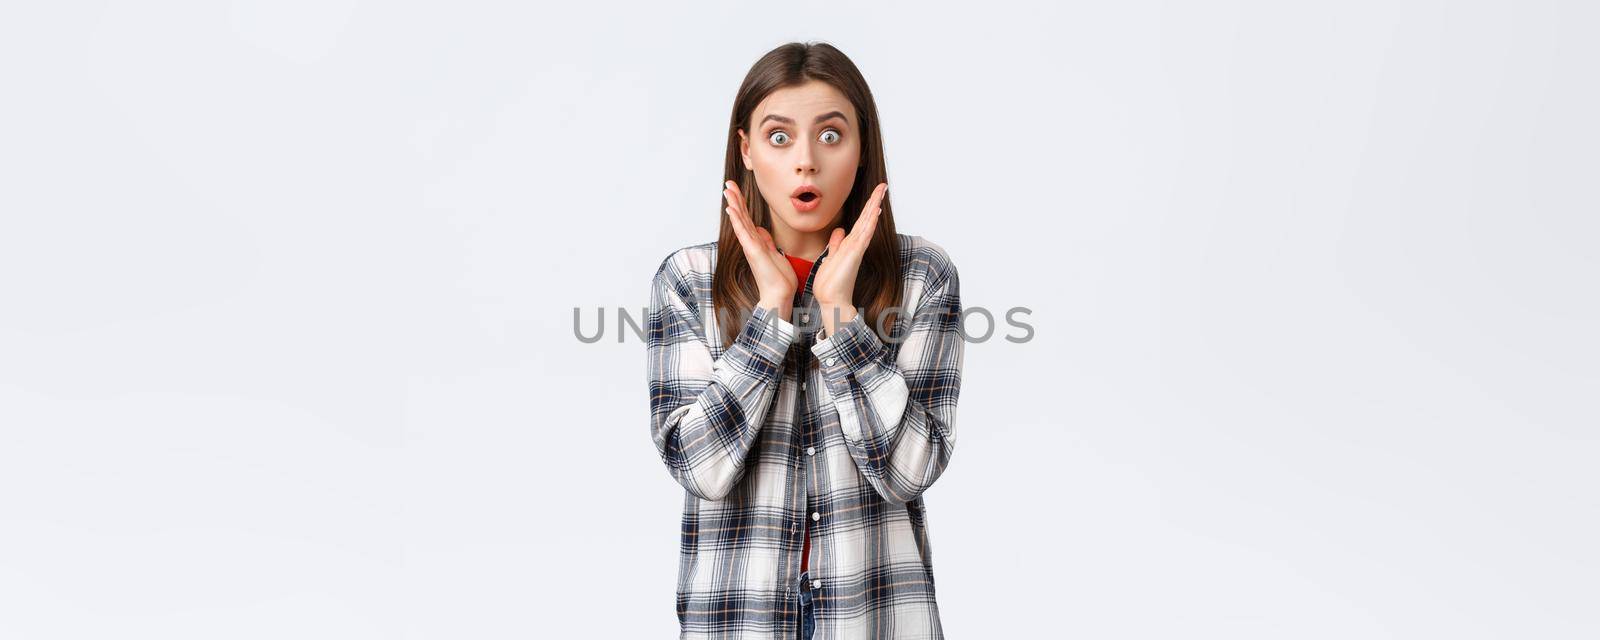 Lifestyle, different emotions, leisure activities concept. Shocked and gasping, startled young caucasian girl in casual outfit, drop jaw, gossiping, say wow and staring amazed camera.